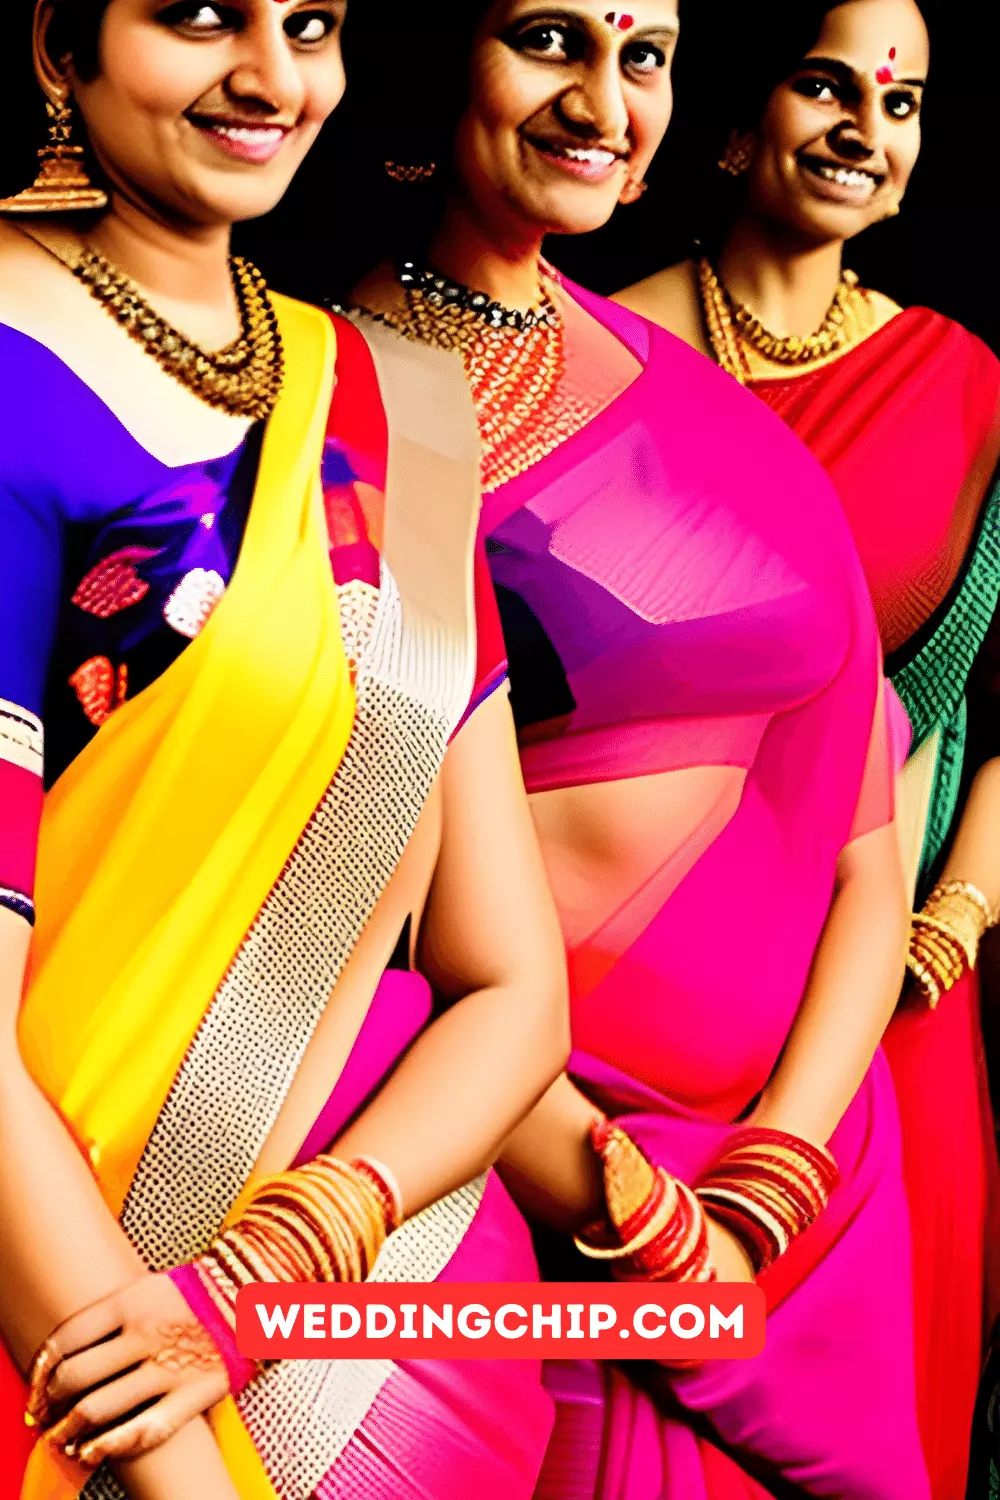 Saree is the most elegant outfit